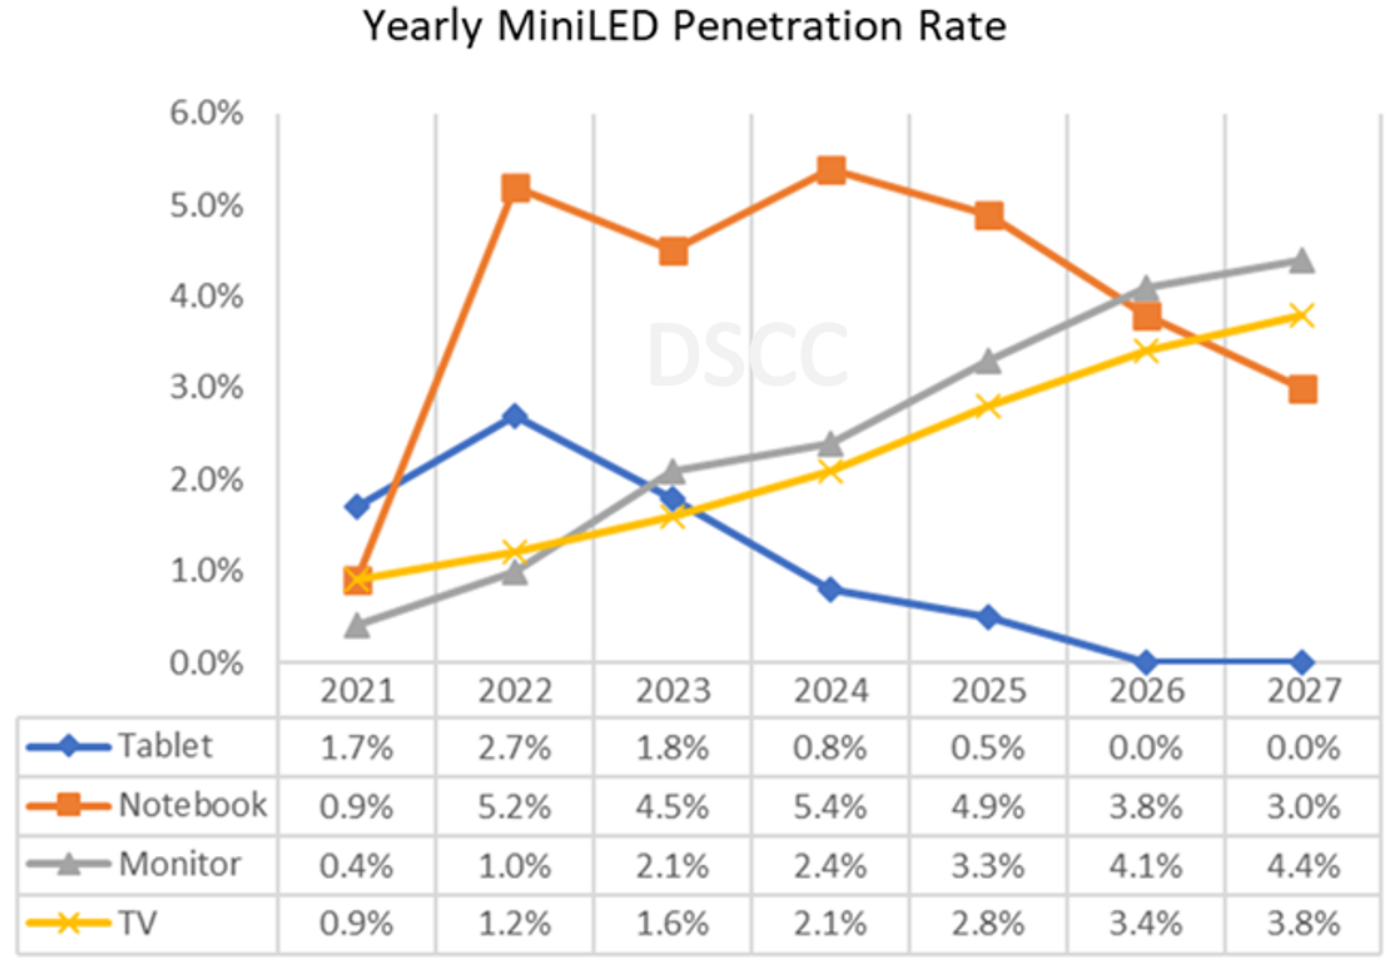 Source: DSCC Quarterly MiniLED Backlight Technologies, Cost and Shipment Report